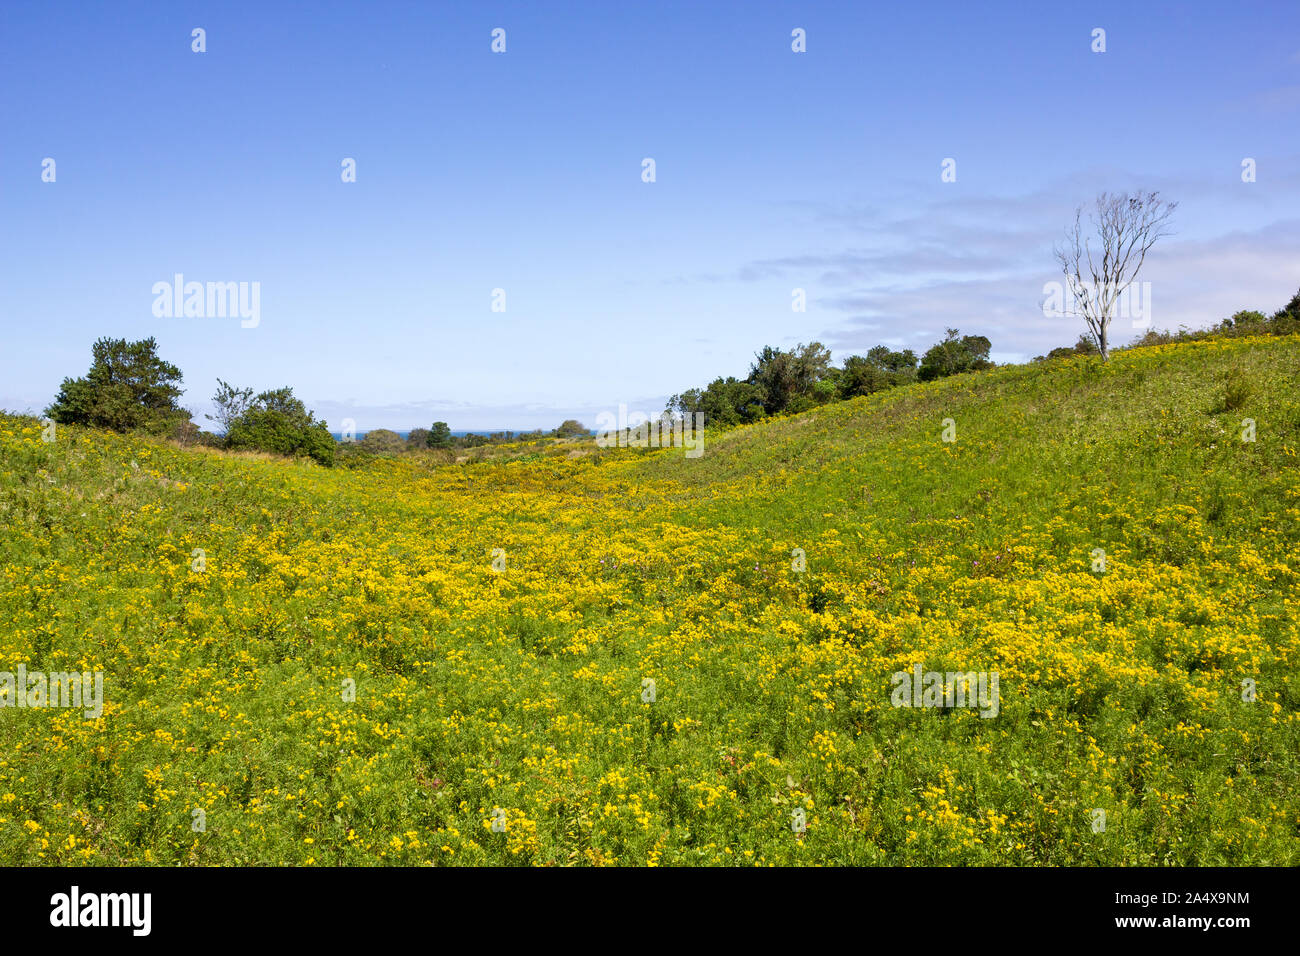 A Beautiful Meadow Filled With Yellow Flowers On Block Island, Rhode Island, United States Of America Stock Photo